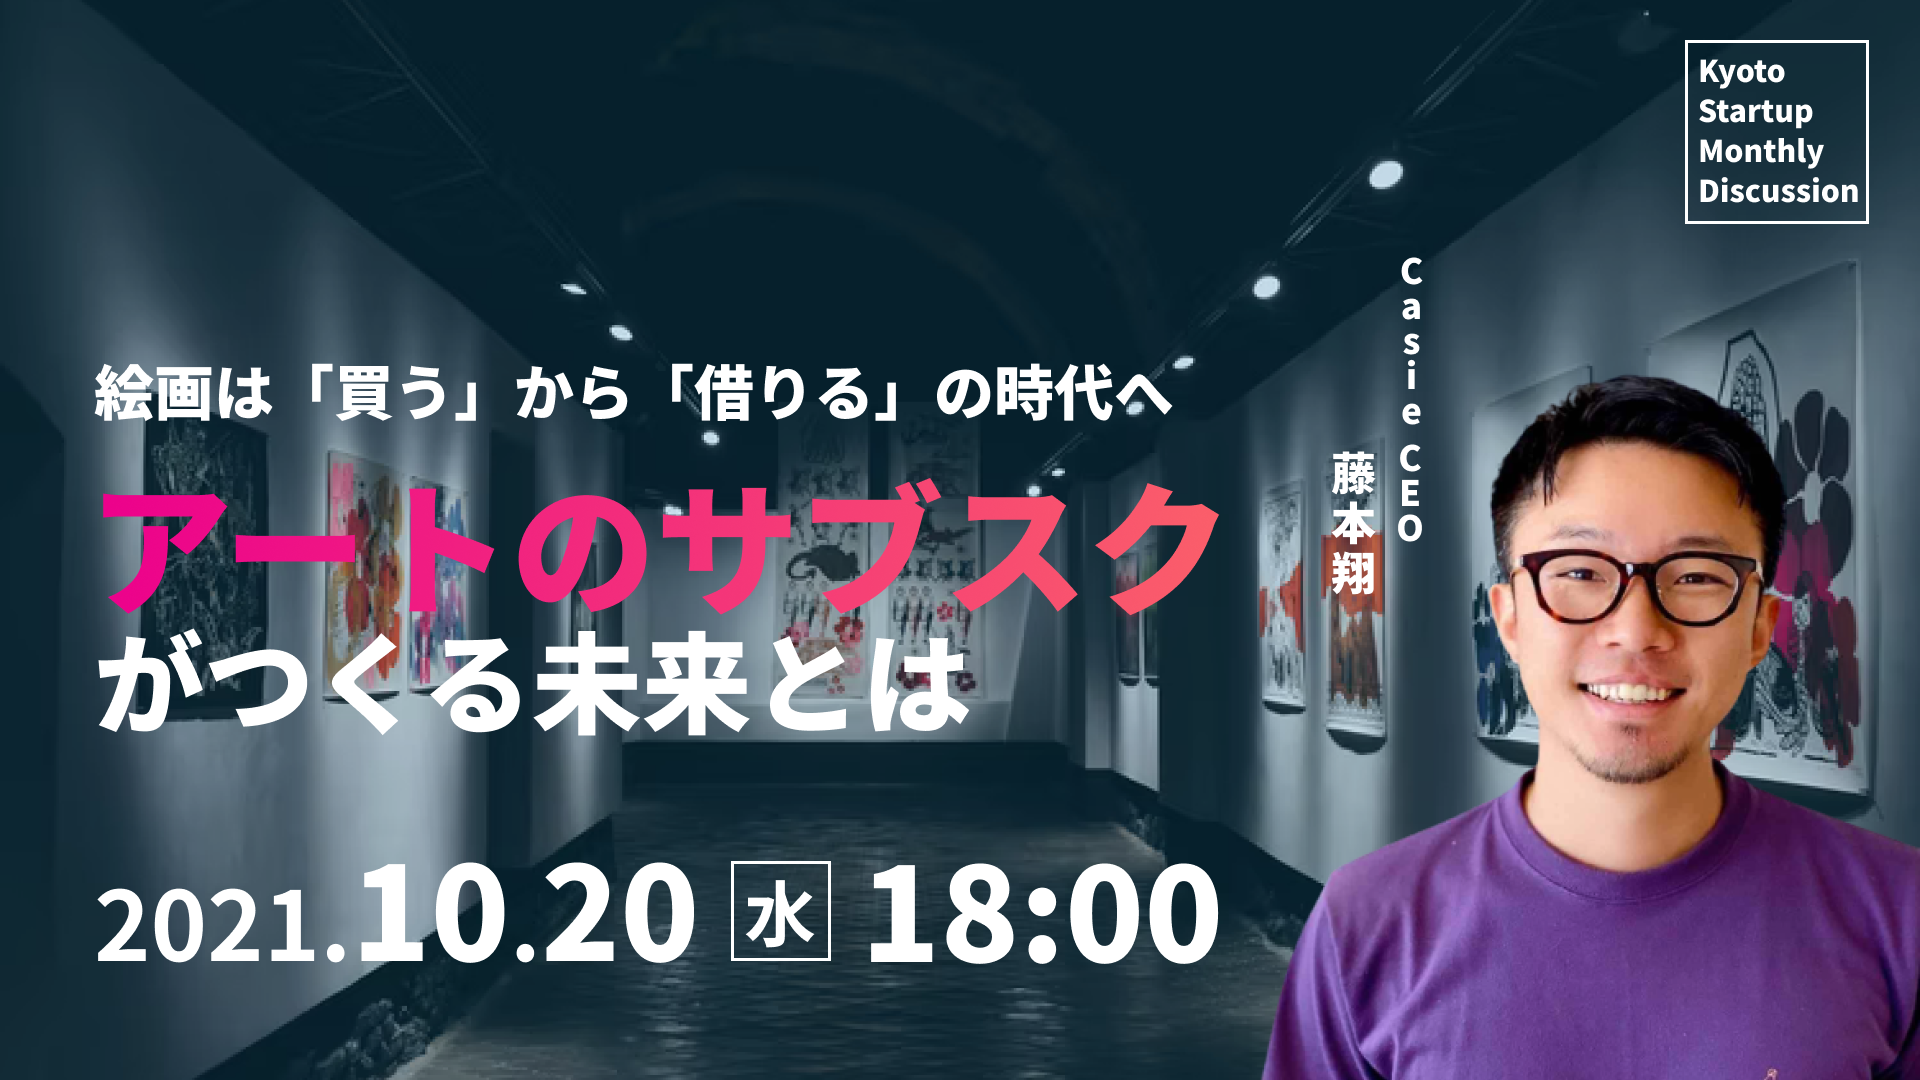 Kyoto Startup Monthly Discussion #05レポート（2021/10/20開催）